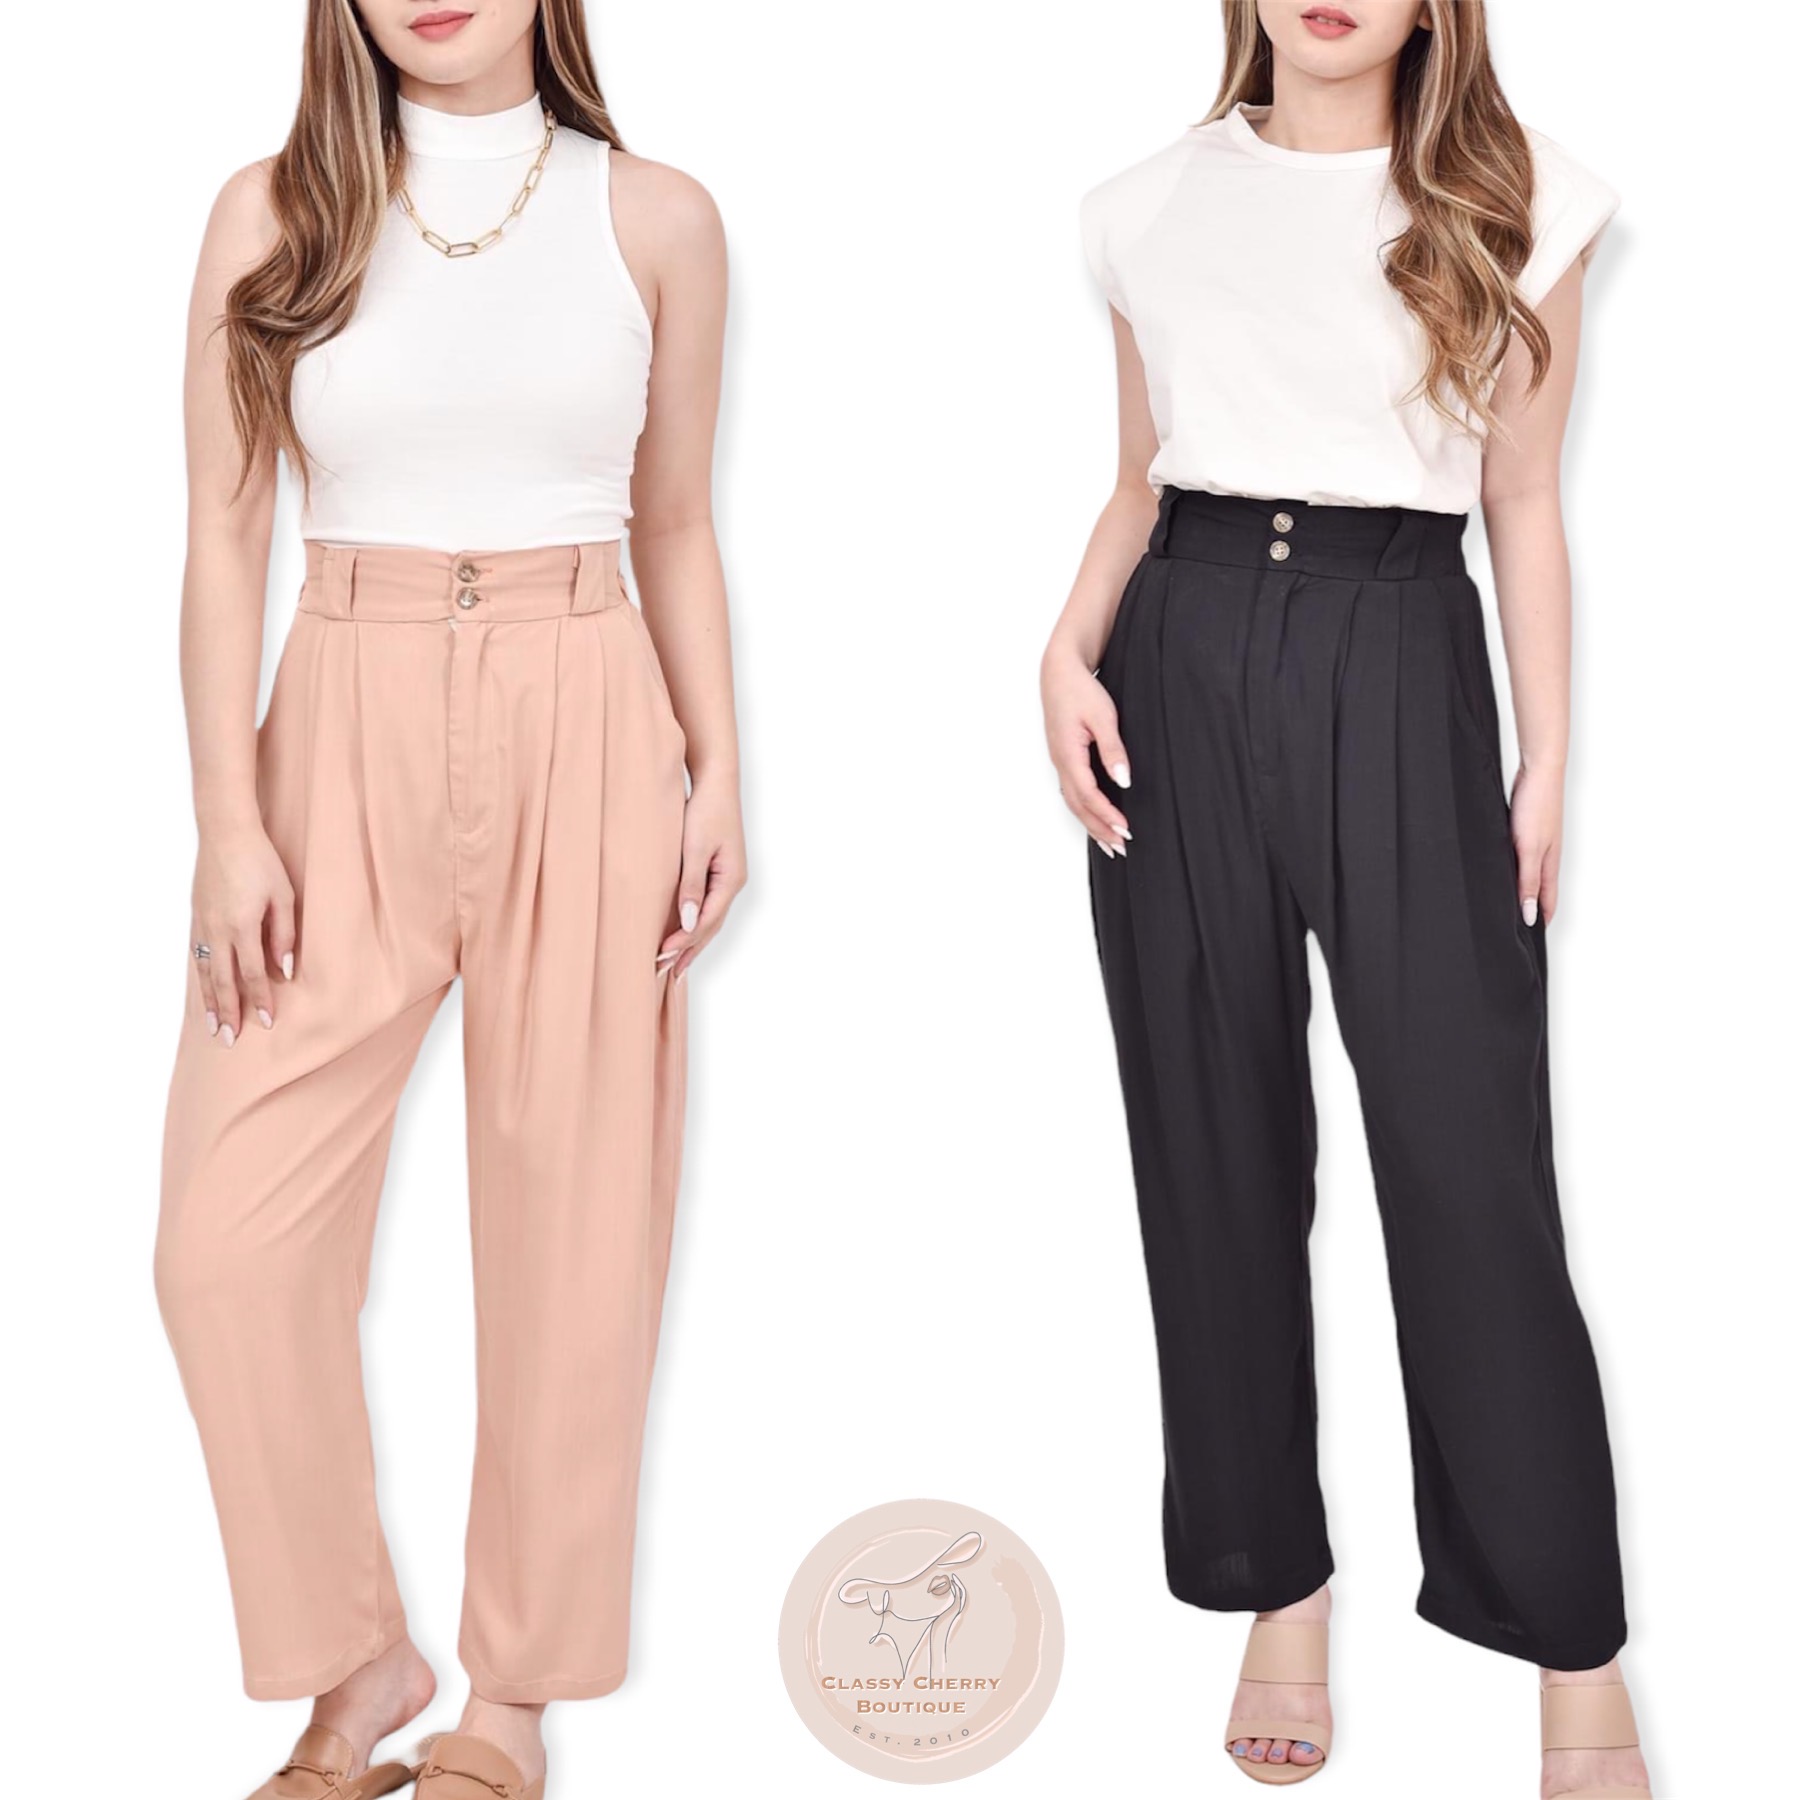 Shop Pants & Trousers for Women Online - Country Road-hancorp34.com.vn